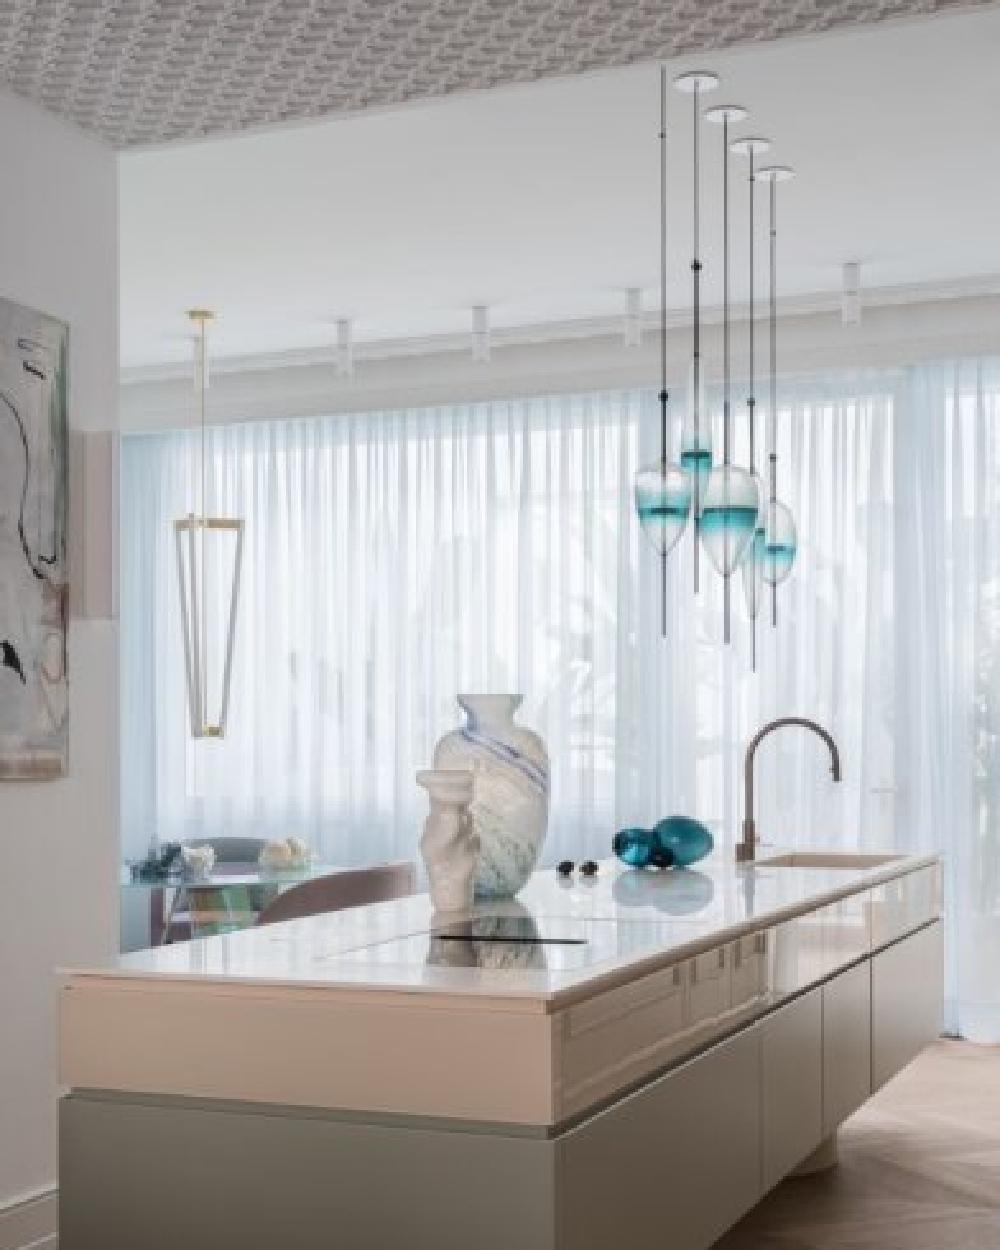 FLOW[T] S5 Pendant lamp in Turquoise by Nao Tamura for Wonderglass For Sale 1